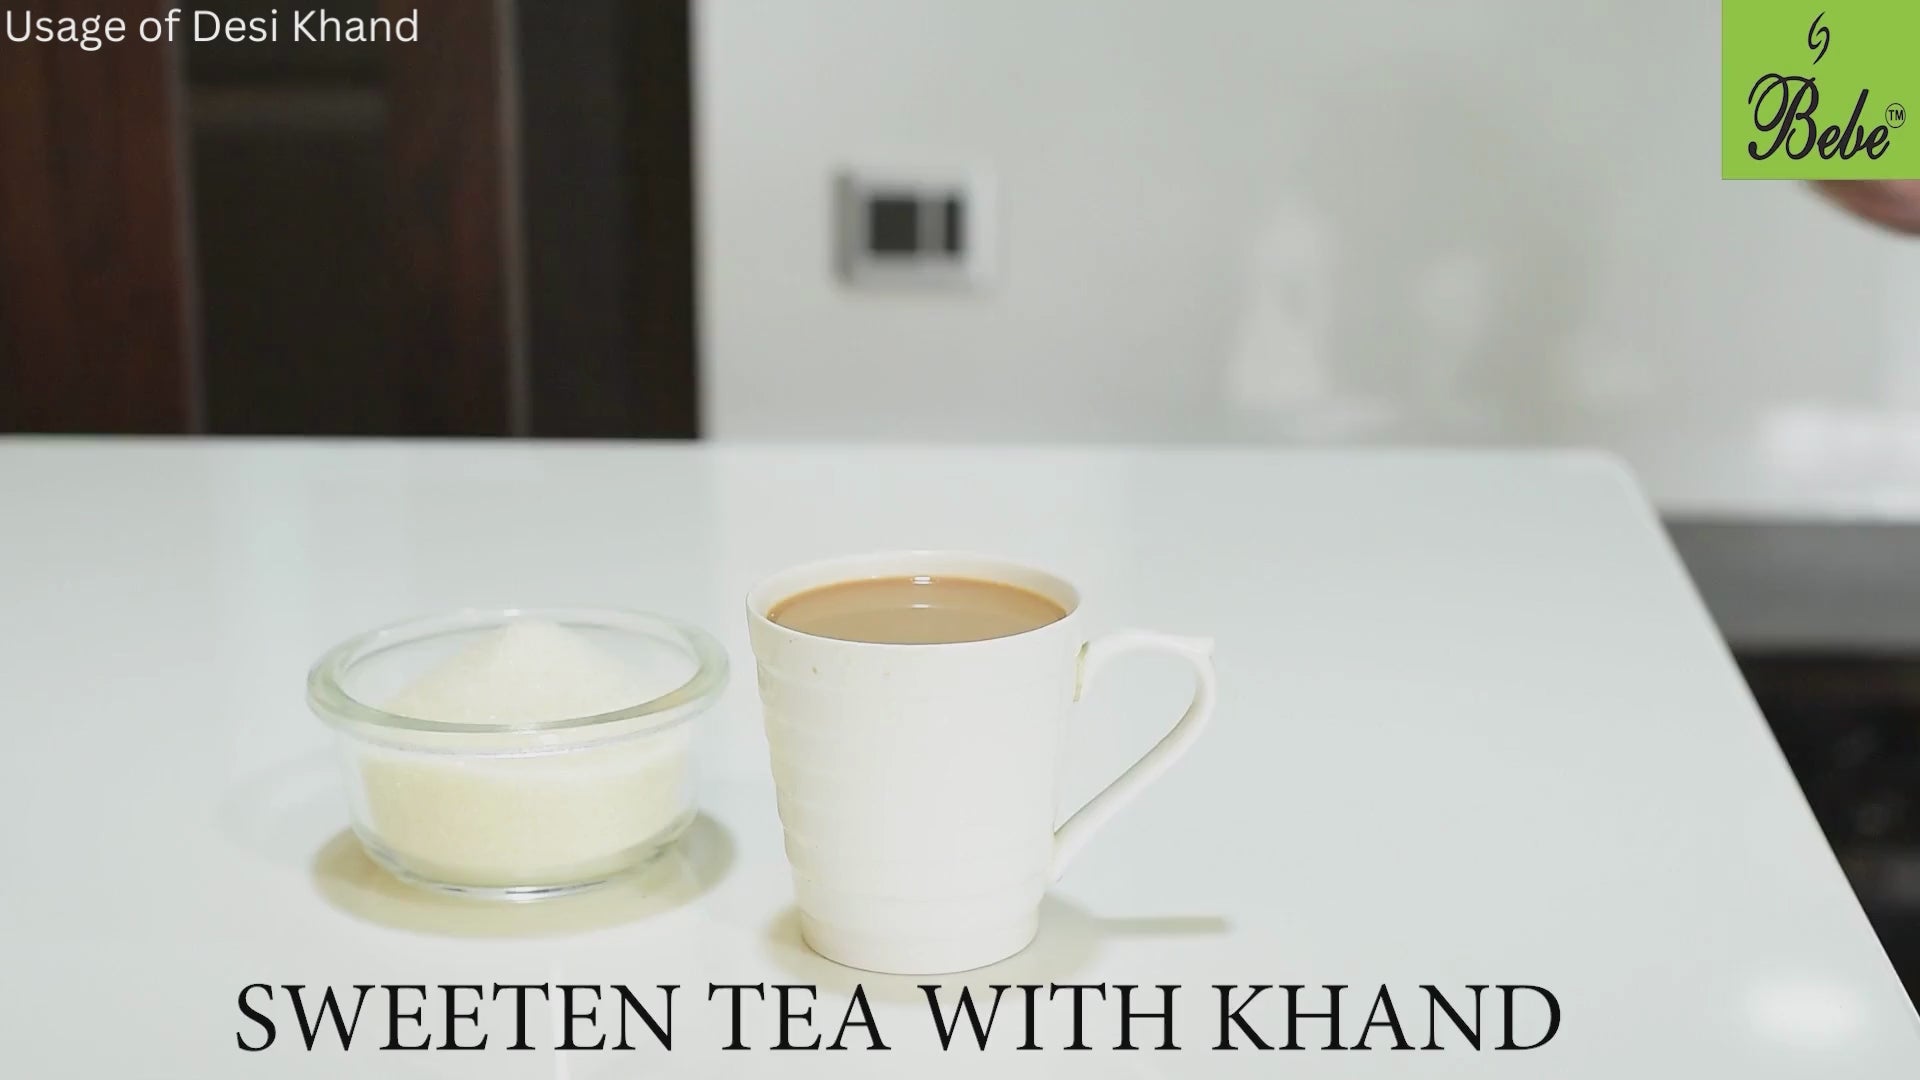 Video about usage of Desi Khnad Bebe Desi khand 750g Front _All Natural  _ Healthy Sugar _ Traditionally made in small batches _ No chemicals _ Culinary Delight_sweetener for Tea,Coffee,Milk